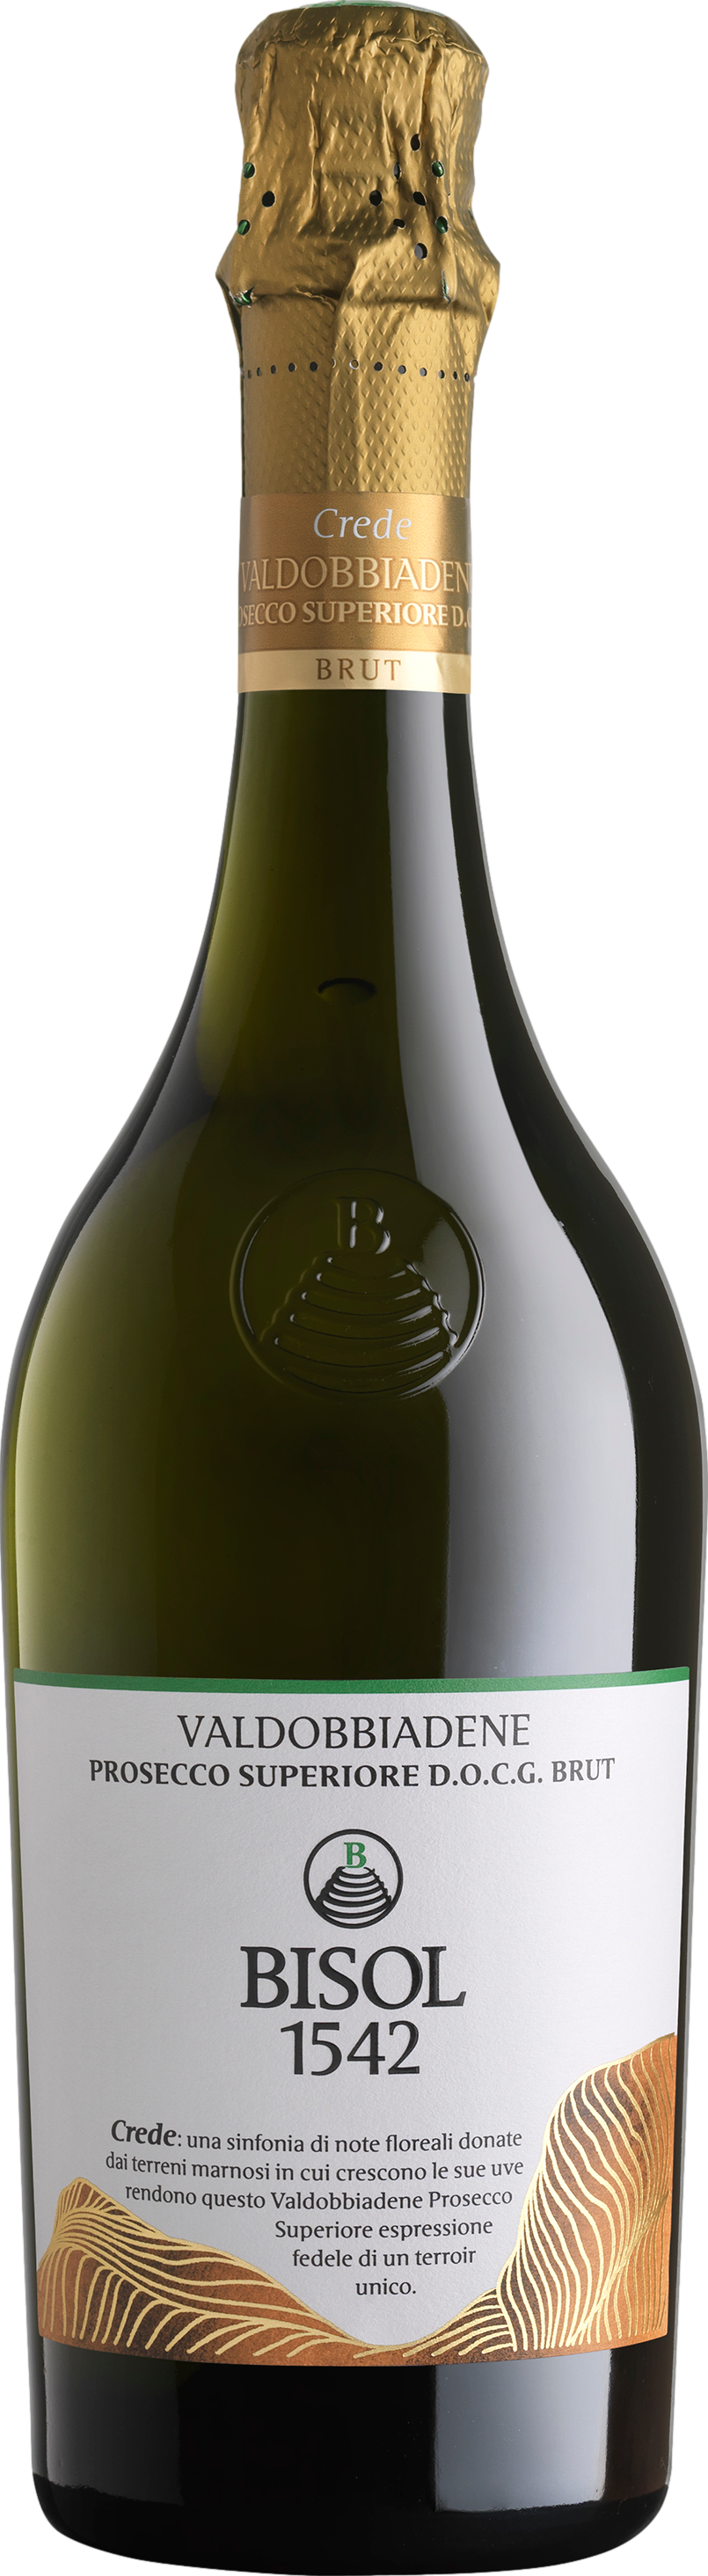 Product image of Bisol Crede Valdobbiadene Prosecco Superiore Brut 2021 from 8wines